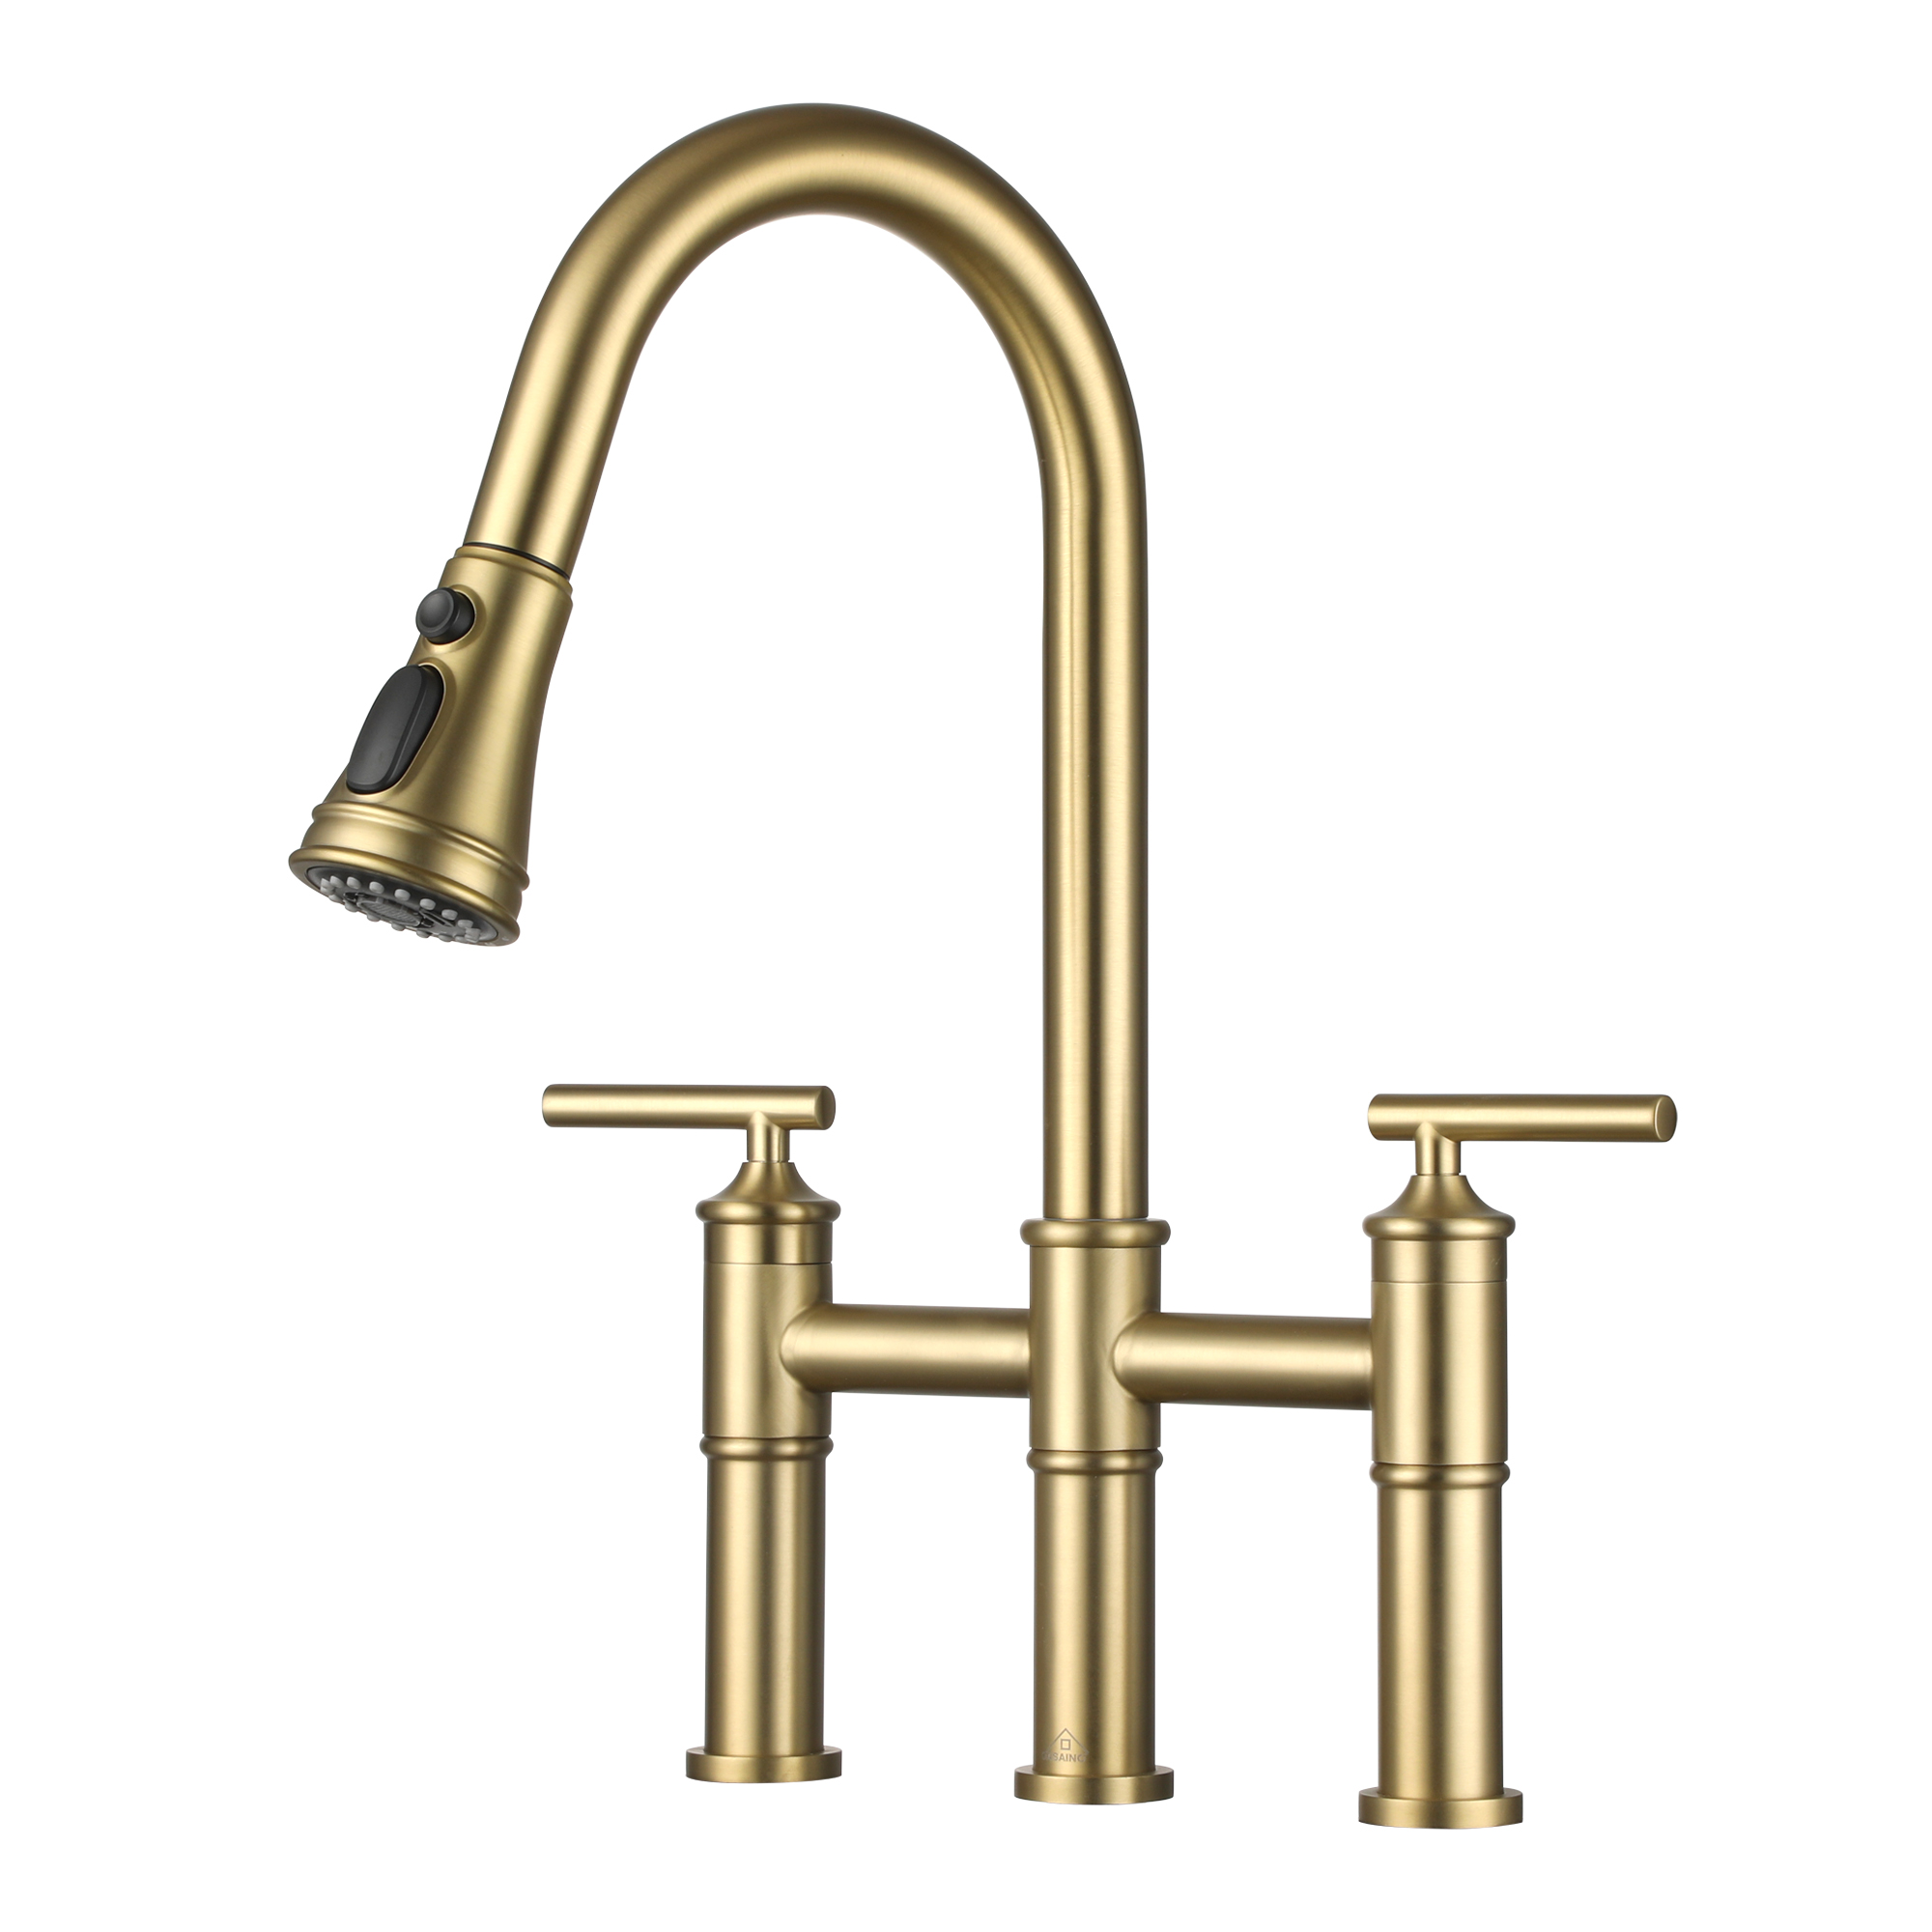 Bridge Pull-Down Kitchen Faucet in Matte Black/Brushed Nickel/Brushed Gold Two Handle Kitchen Faucets